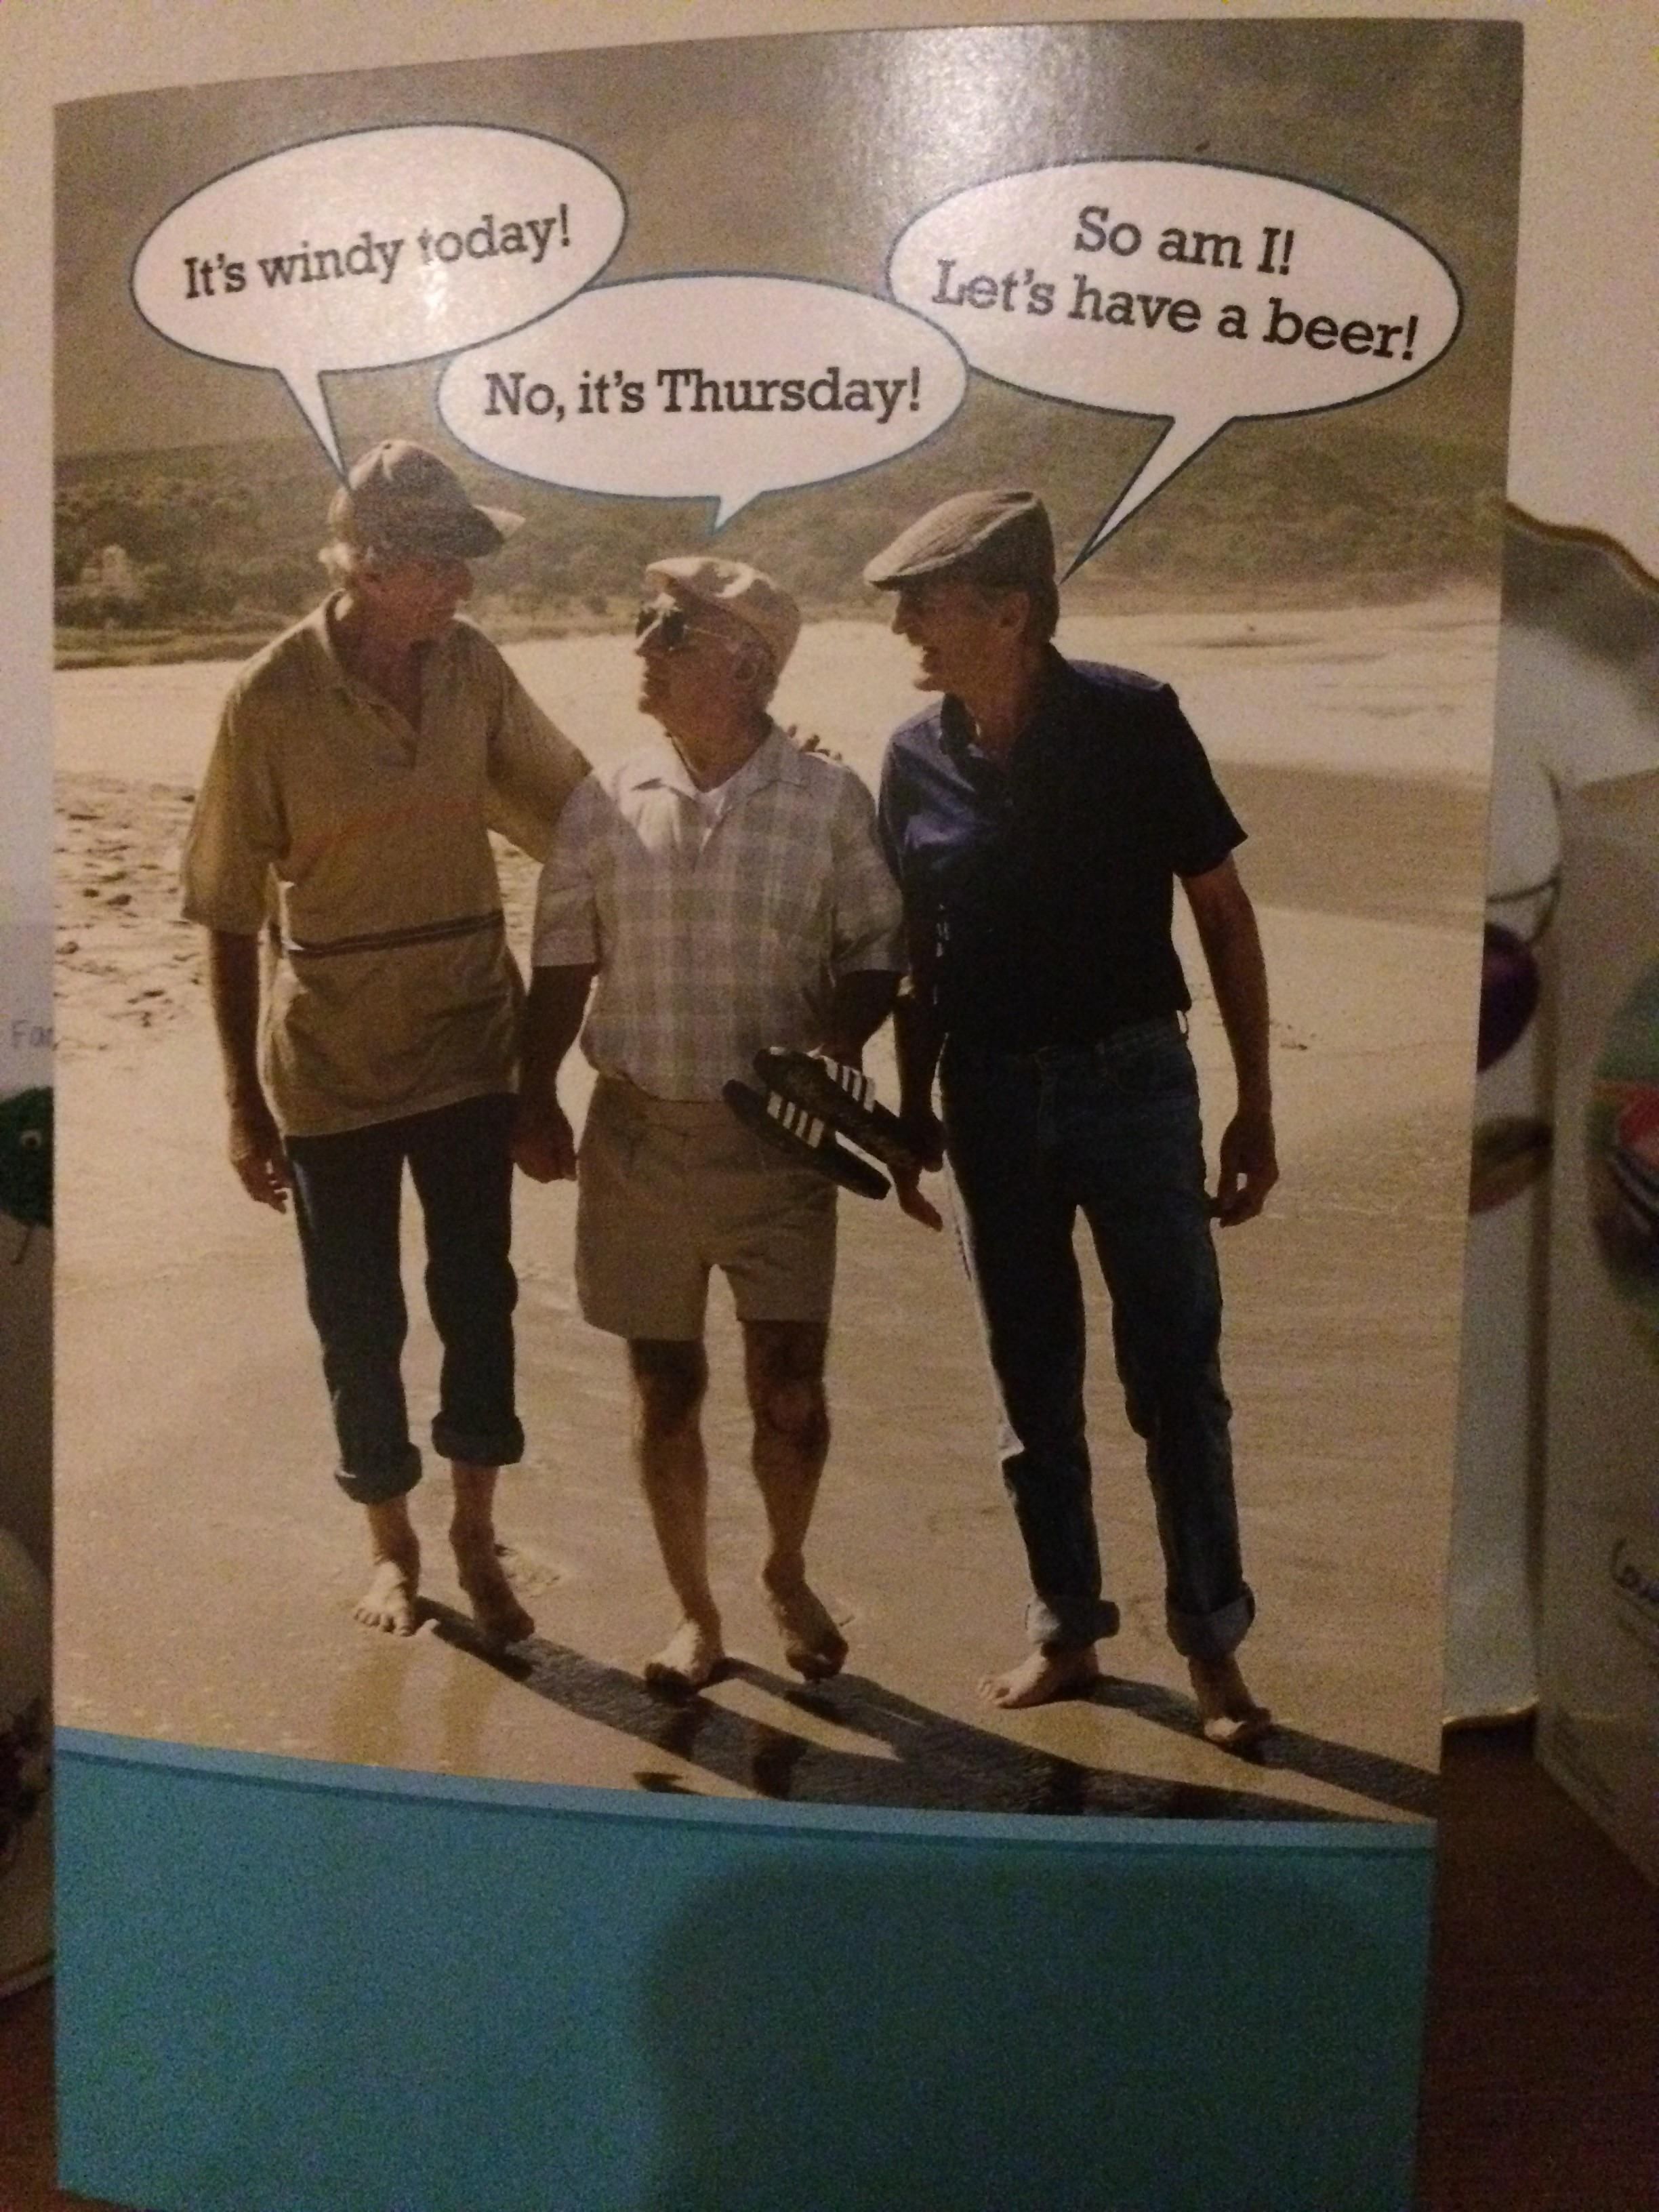 My dad got this great card for his birthday